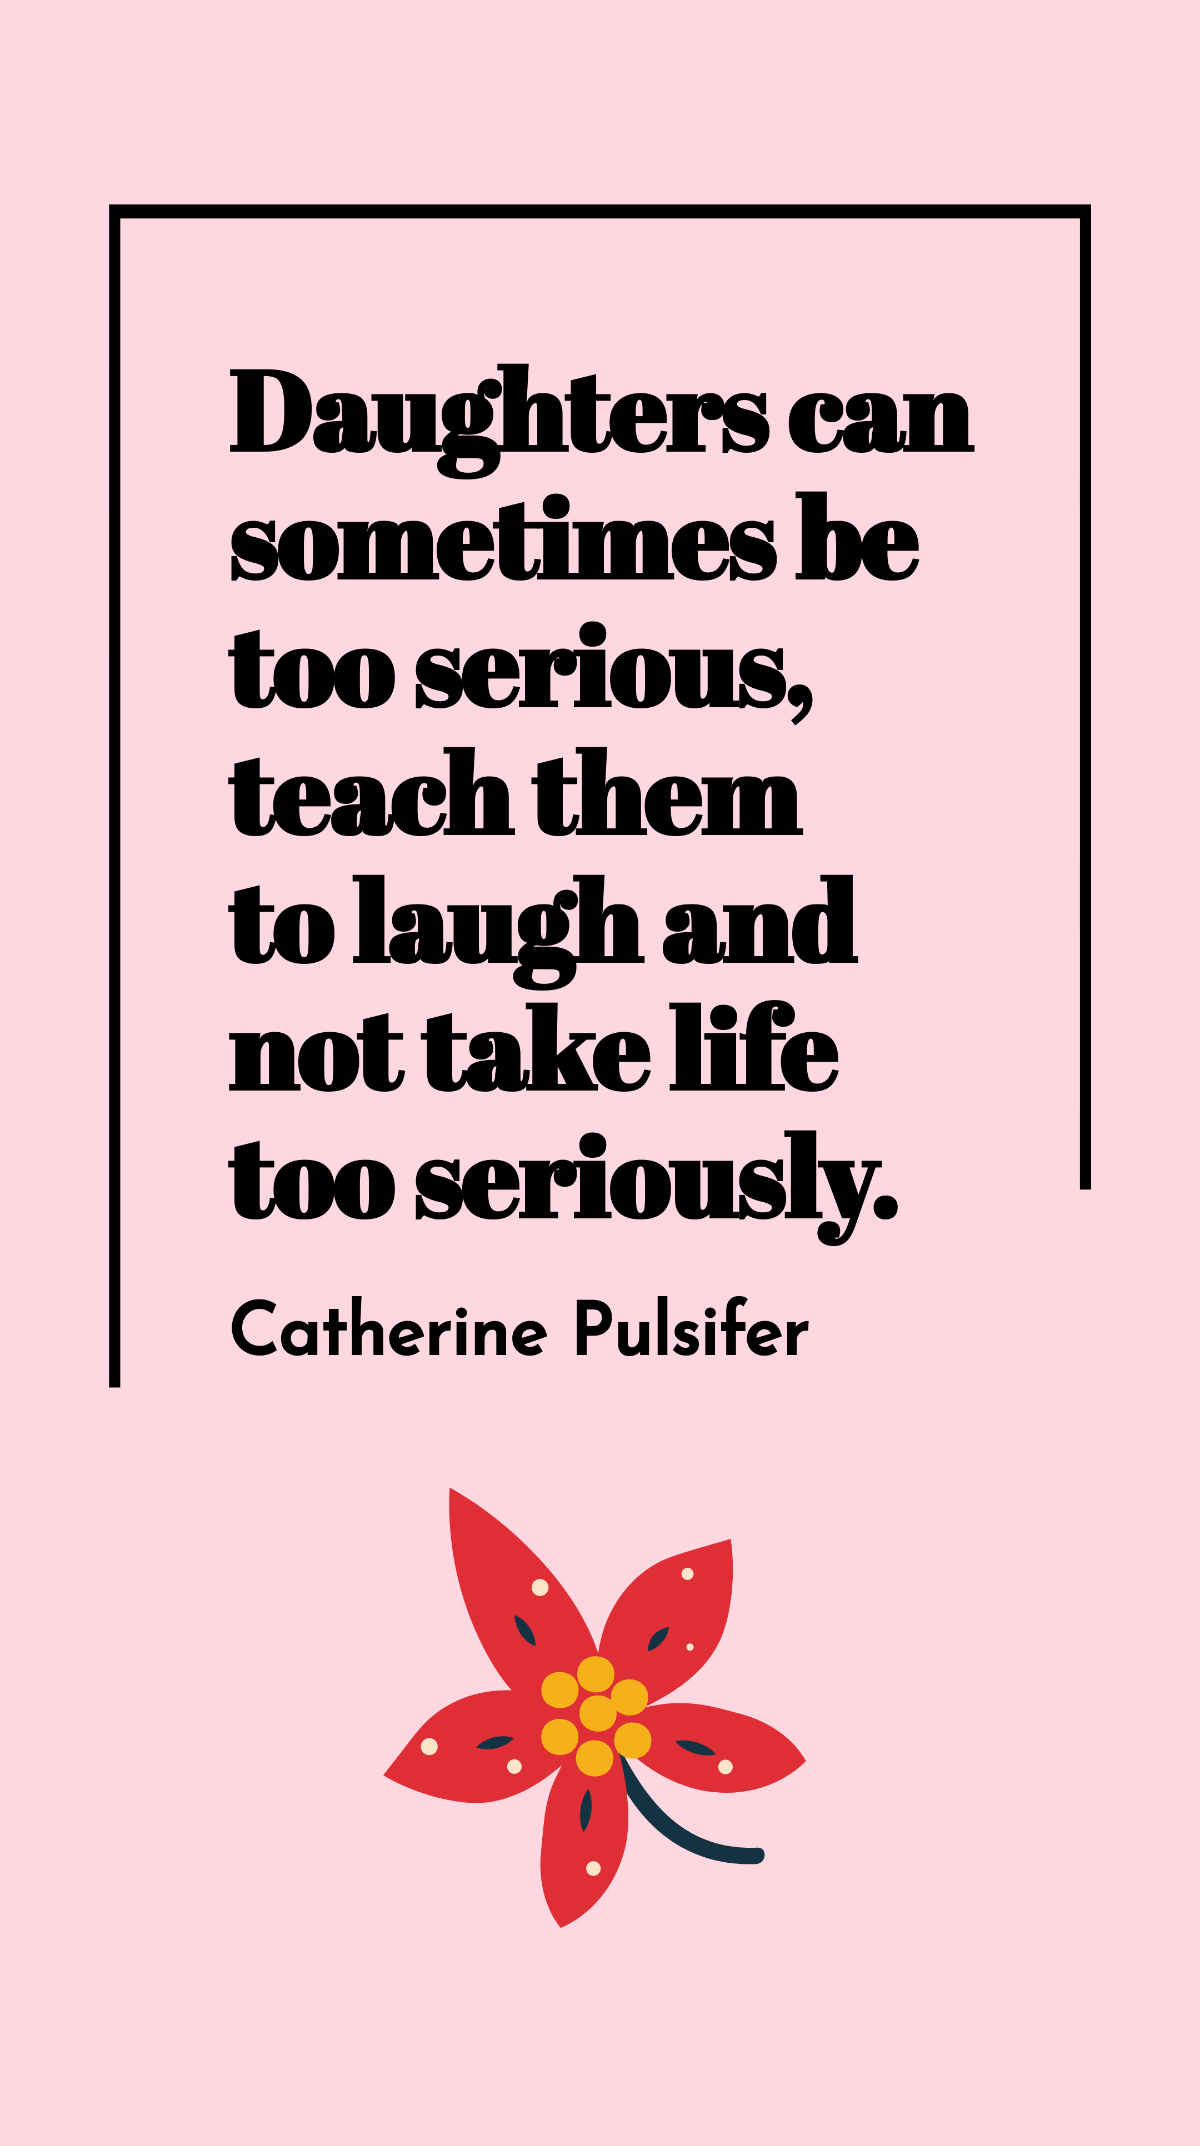 Free Catherine Pulsifer - Daughters can sometimes be too serious, teach them to laugh and not take life too seriously. Template